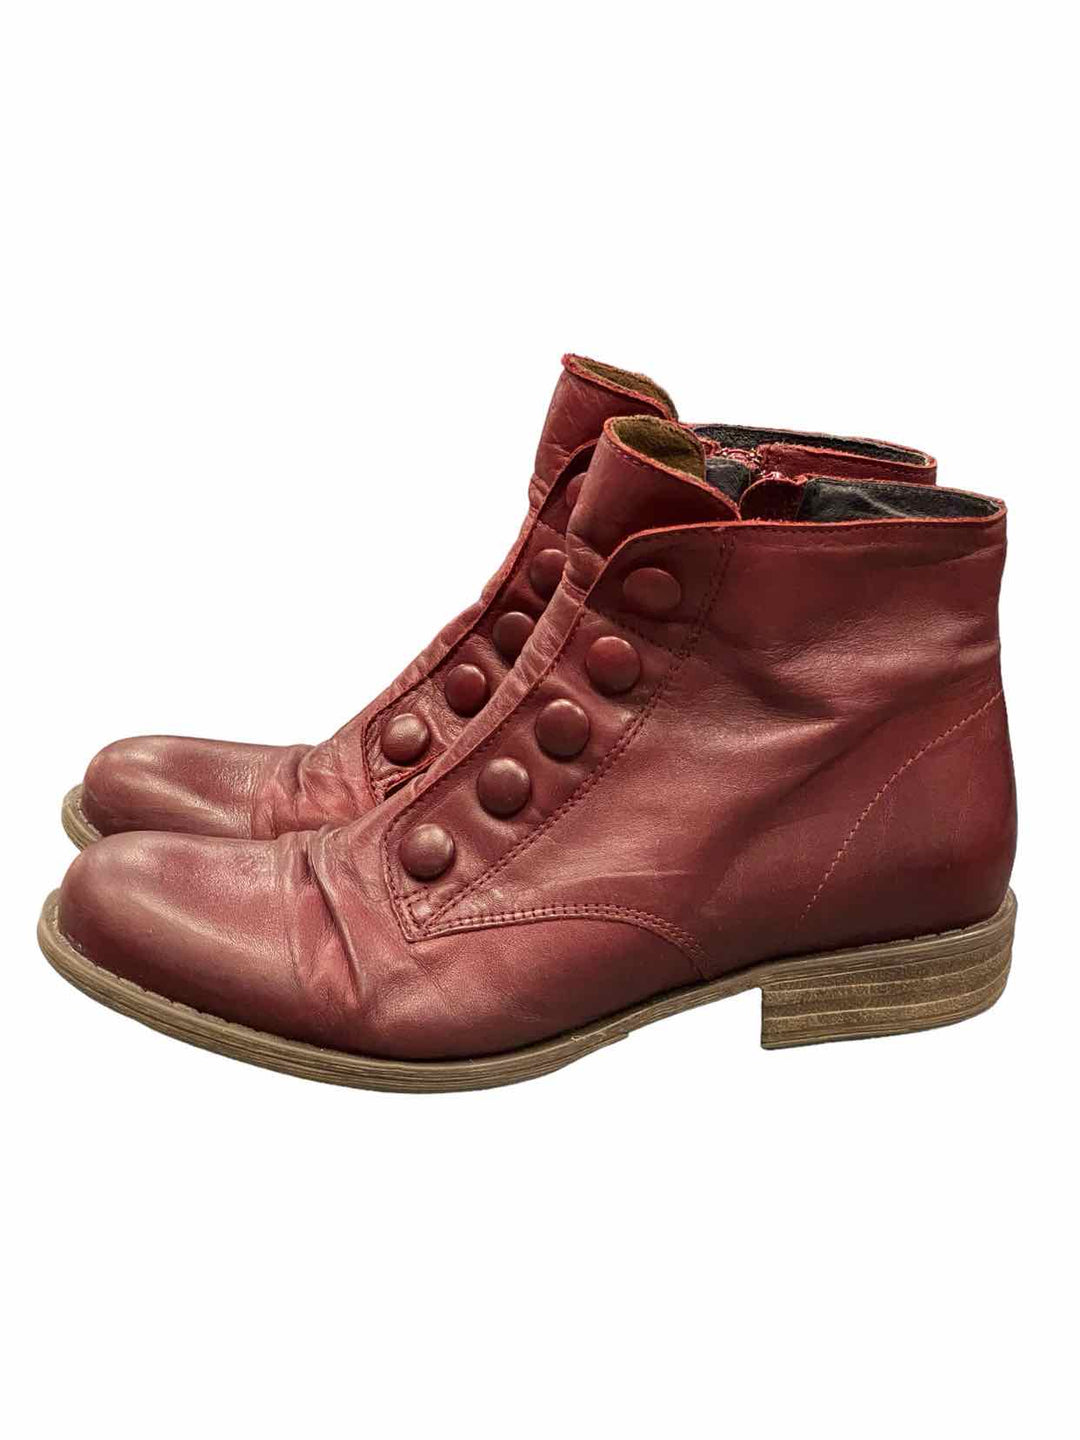 Miz Mooz Shoe Size 8.5 Red Leather Boots(Ankle)